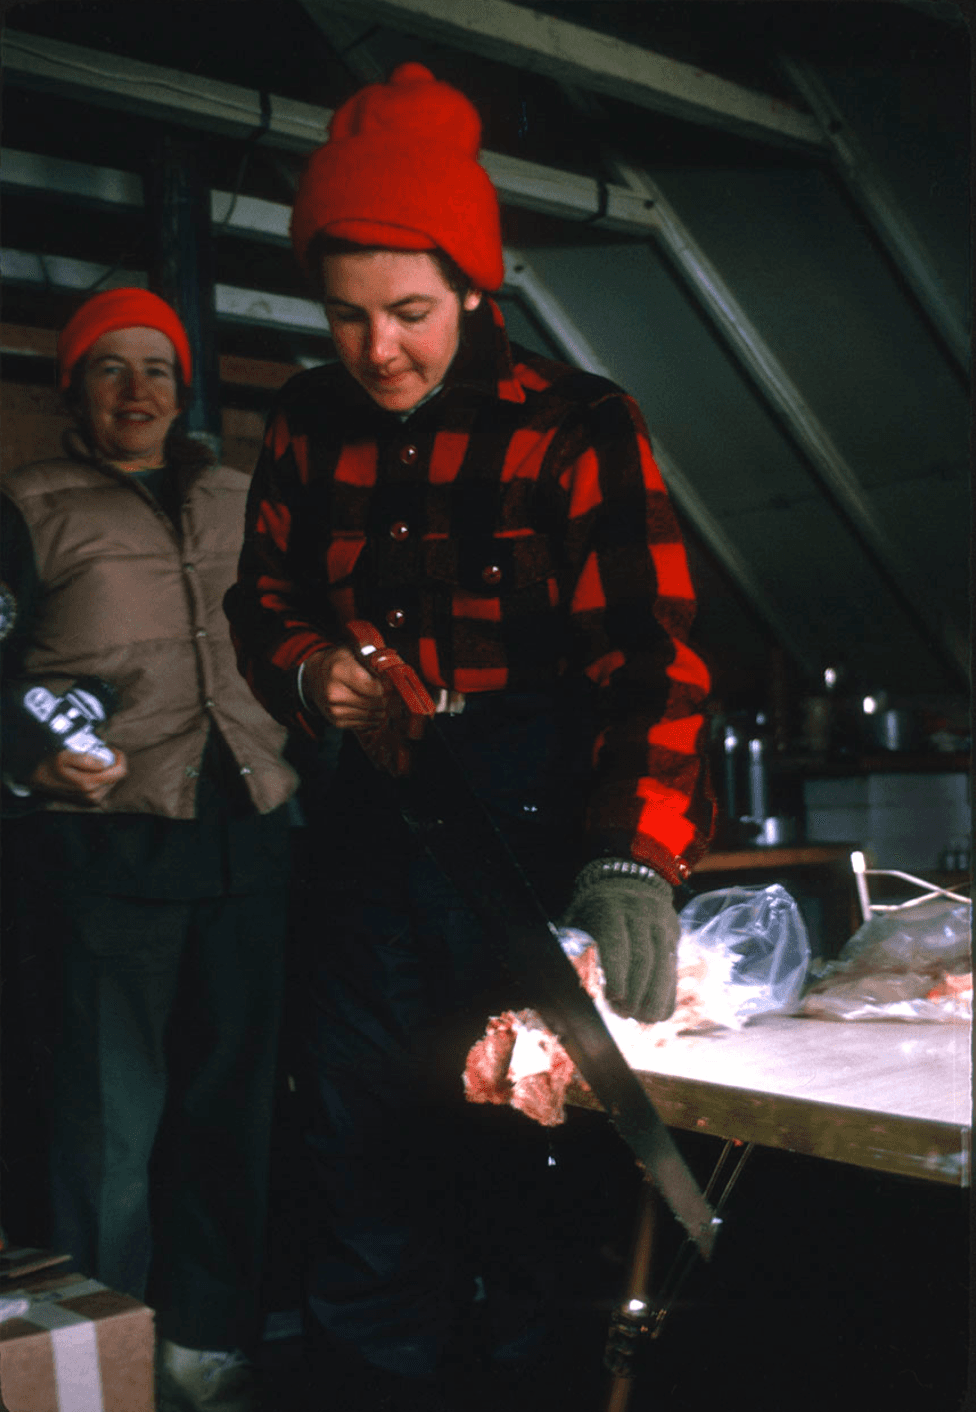 A woman in a red and black shirt cuts a steak with a saw.